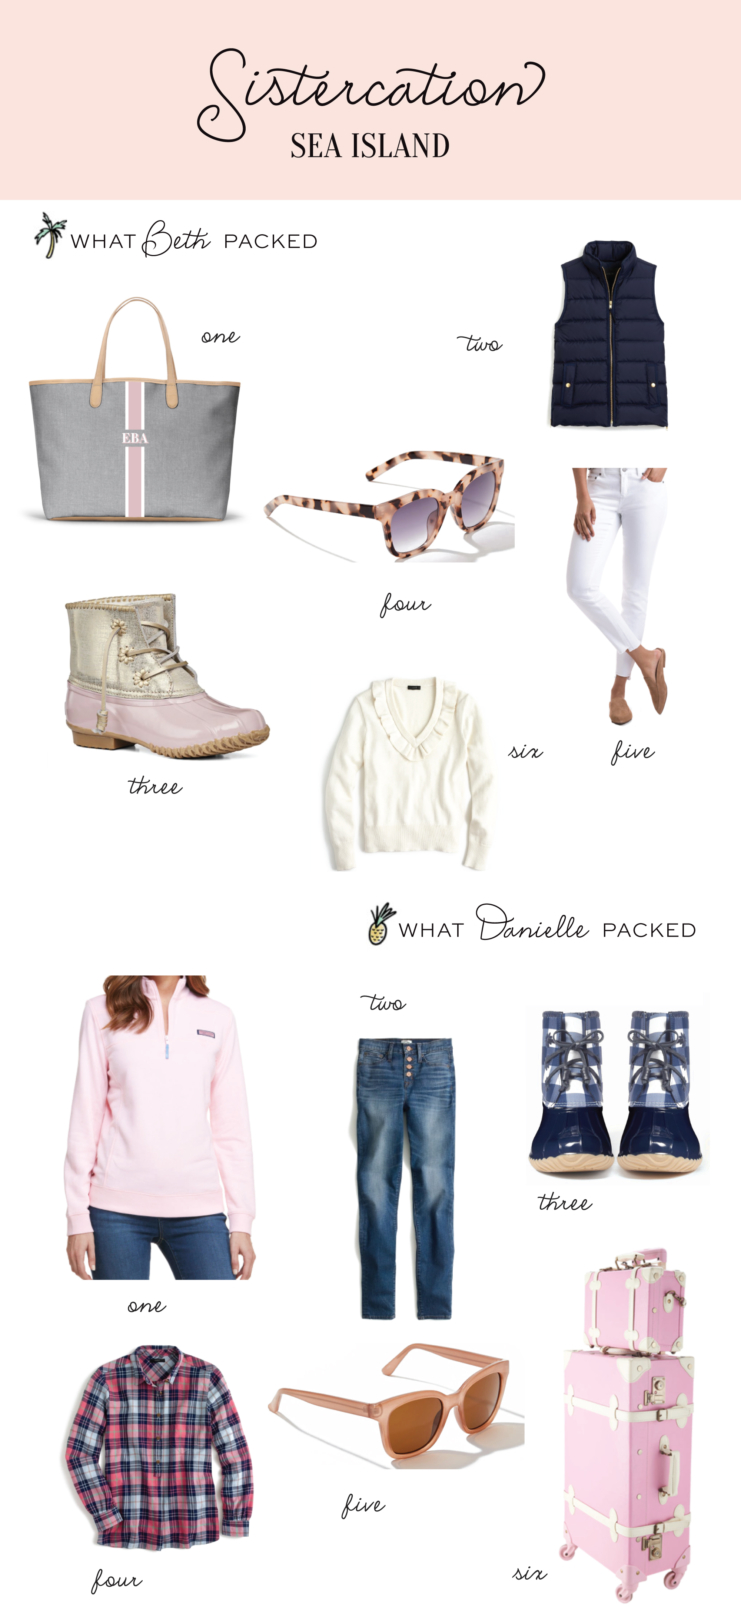 Travel: What to Pack for Sea Island with Palm Beach Lately